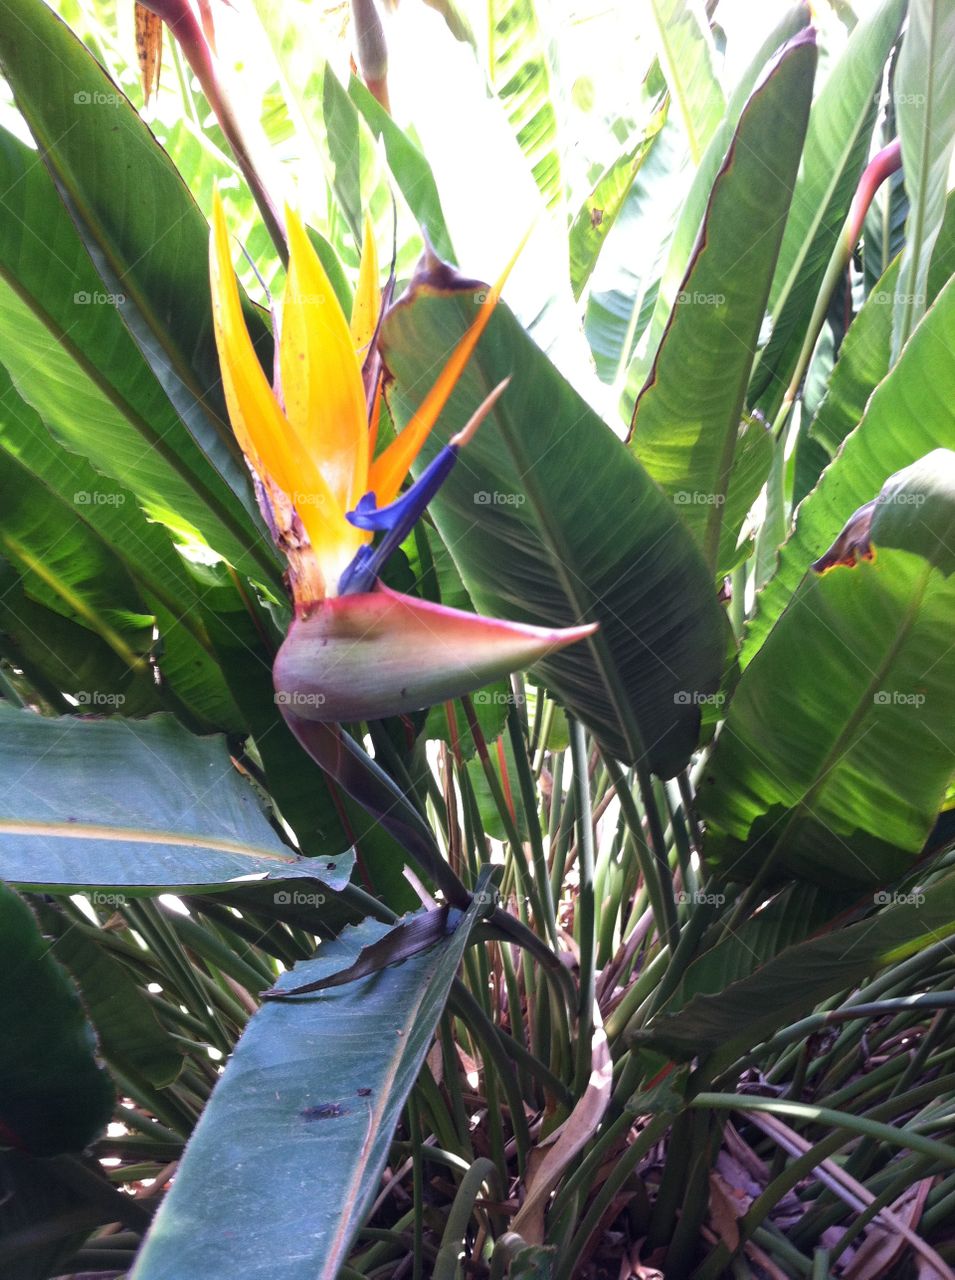 Even birds of paradise can squawk. 